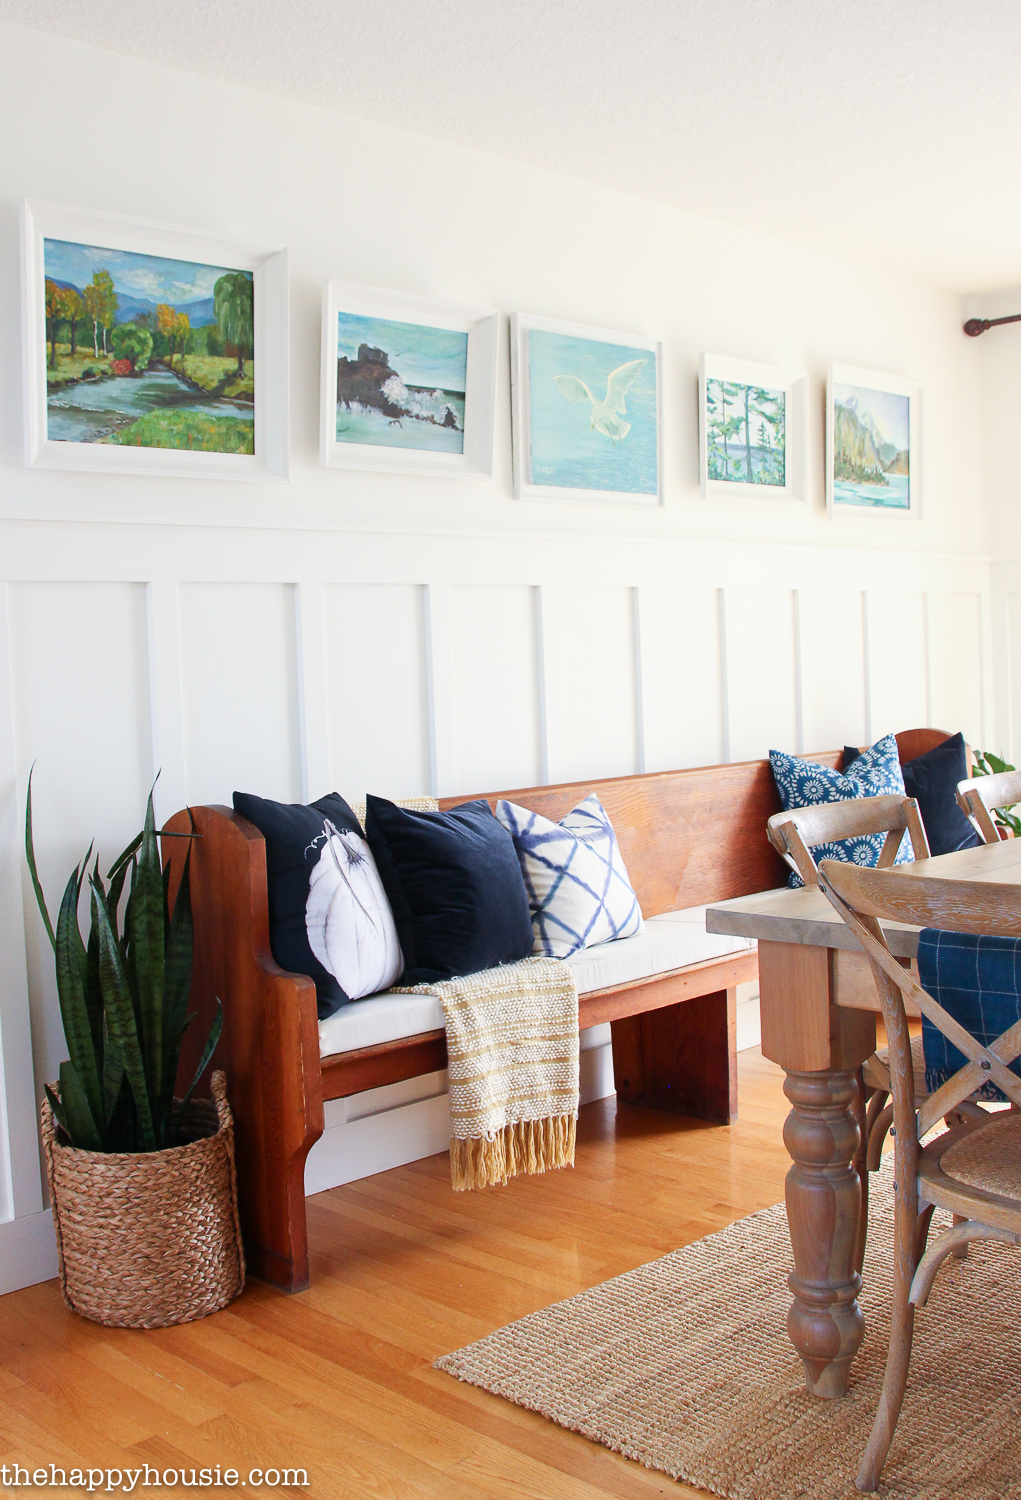 A wooden bench with pillows is on the board and batten wall in the dining room.